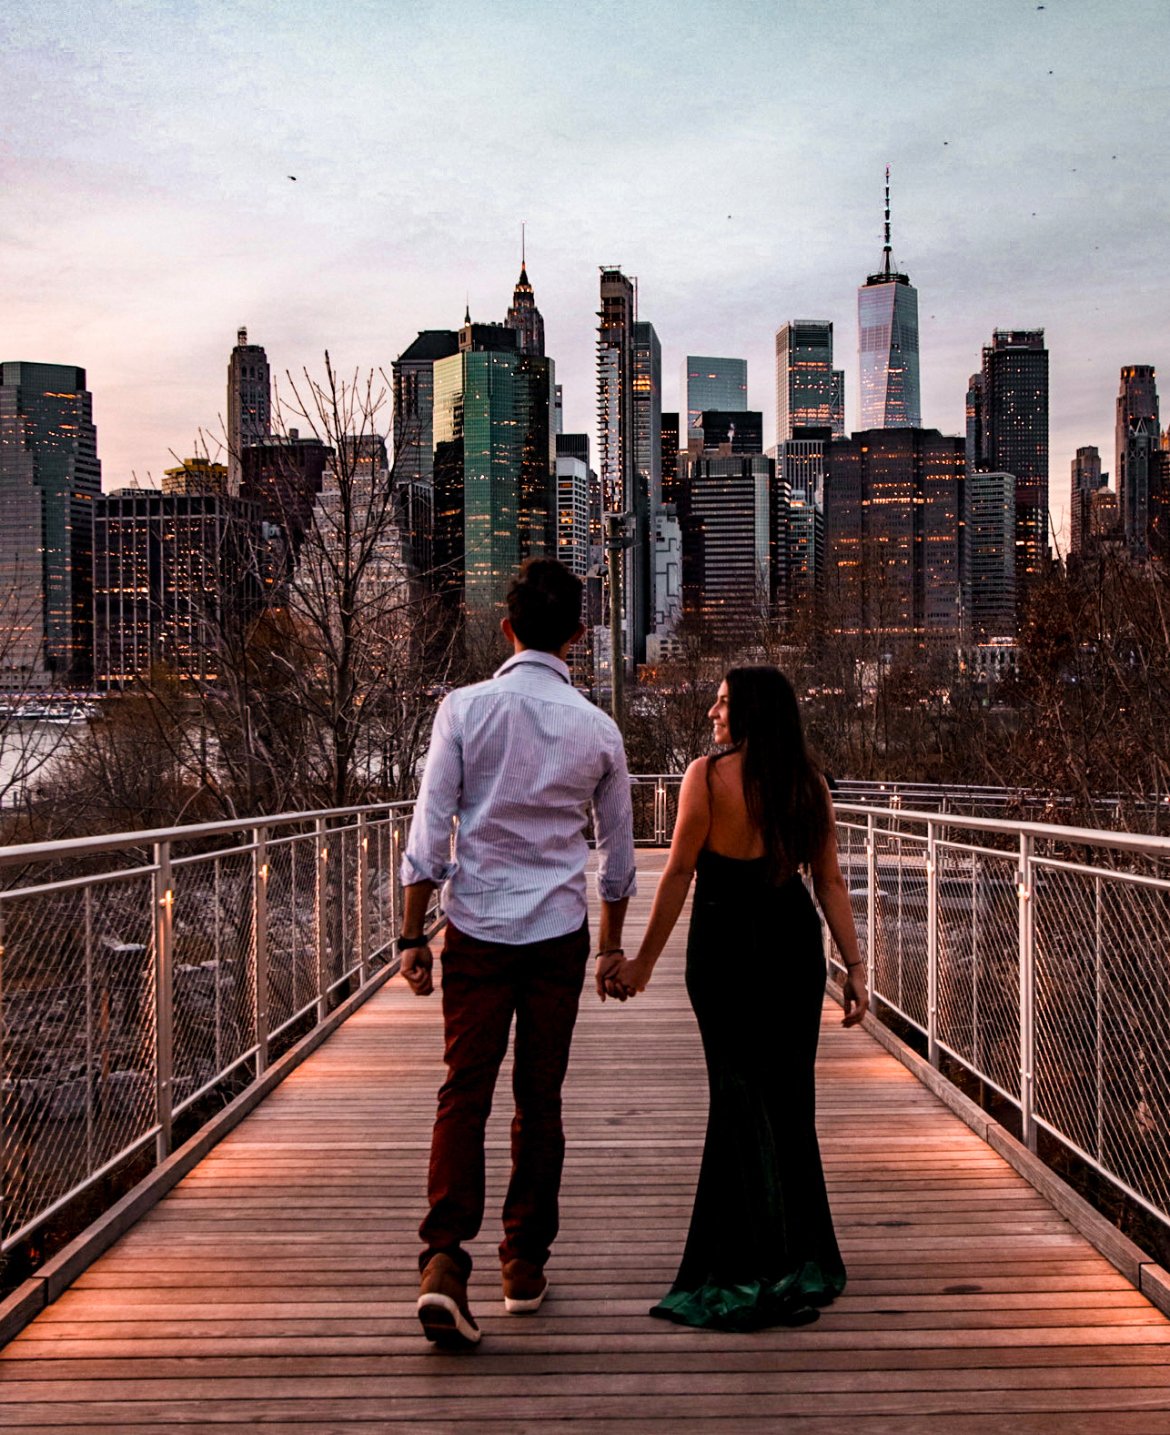 Squibb Park Bridge, Instagrammable places in NYC